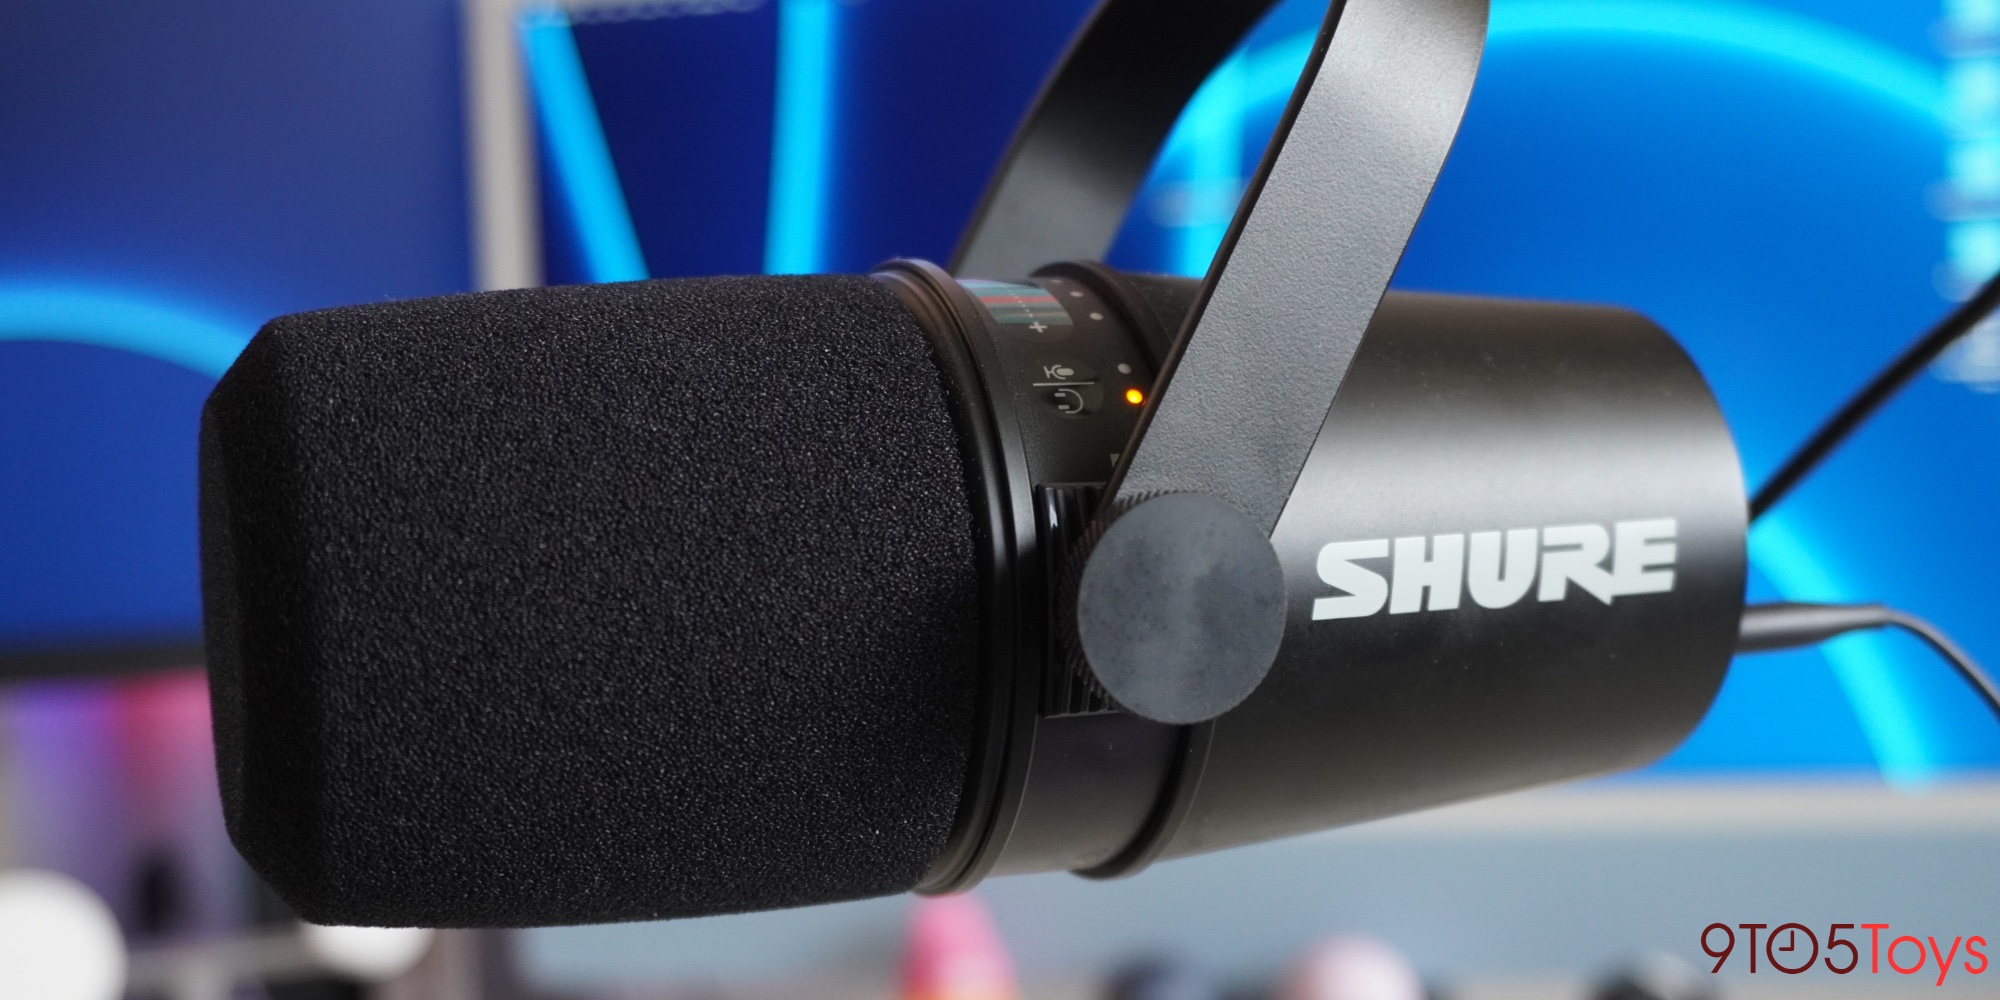 Shure MV7 review: The perfect podcasting microphone